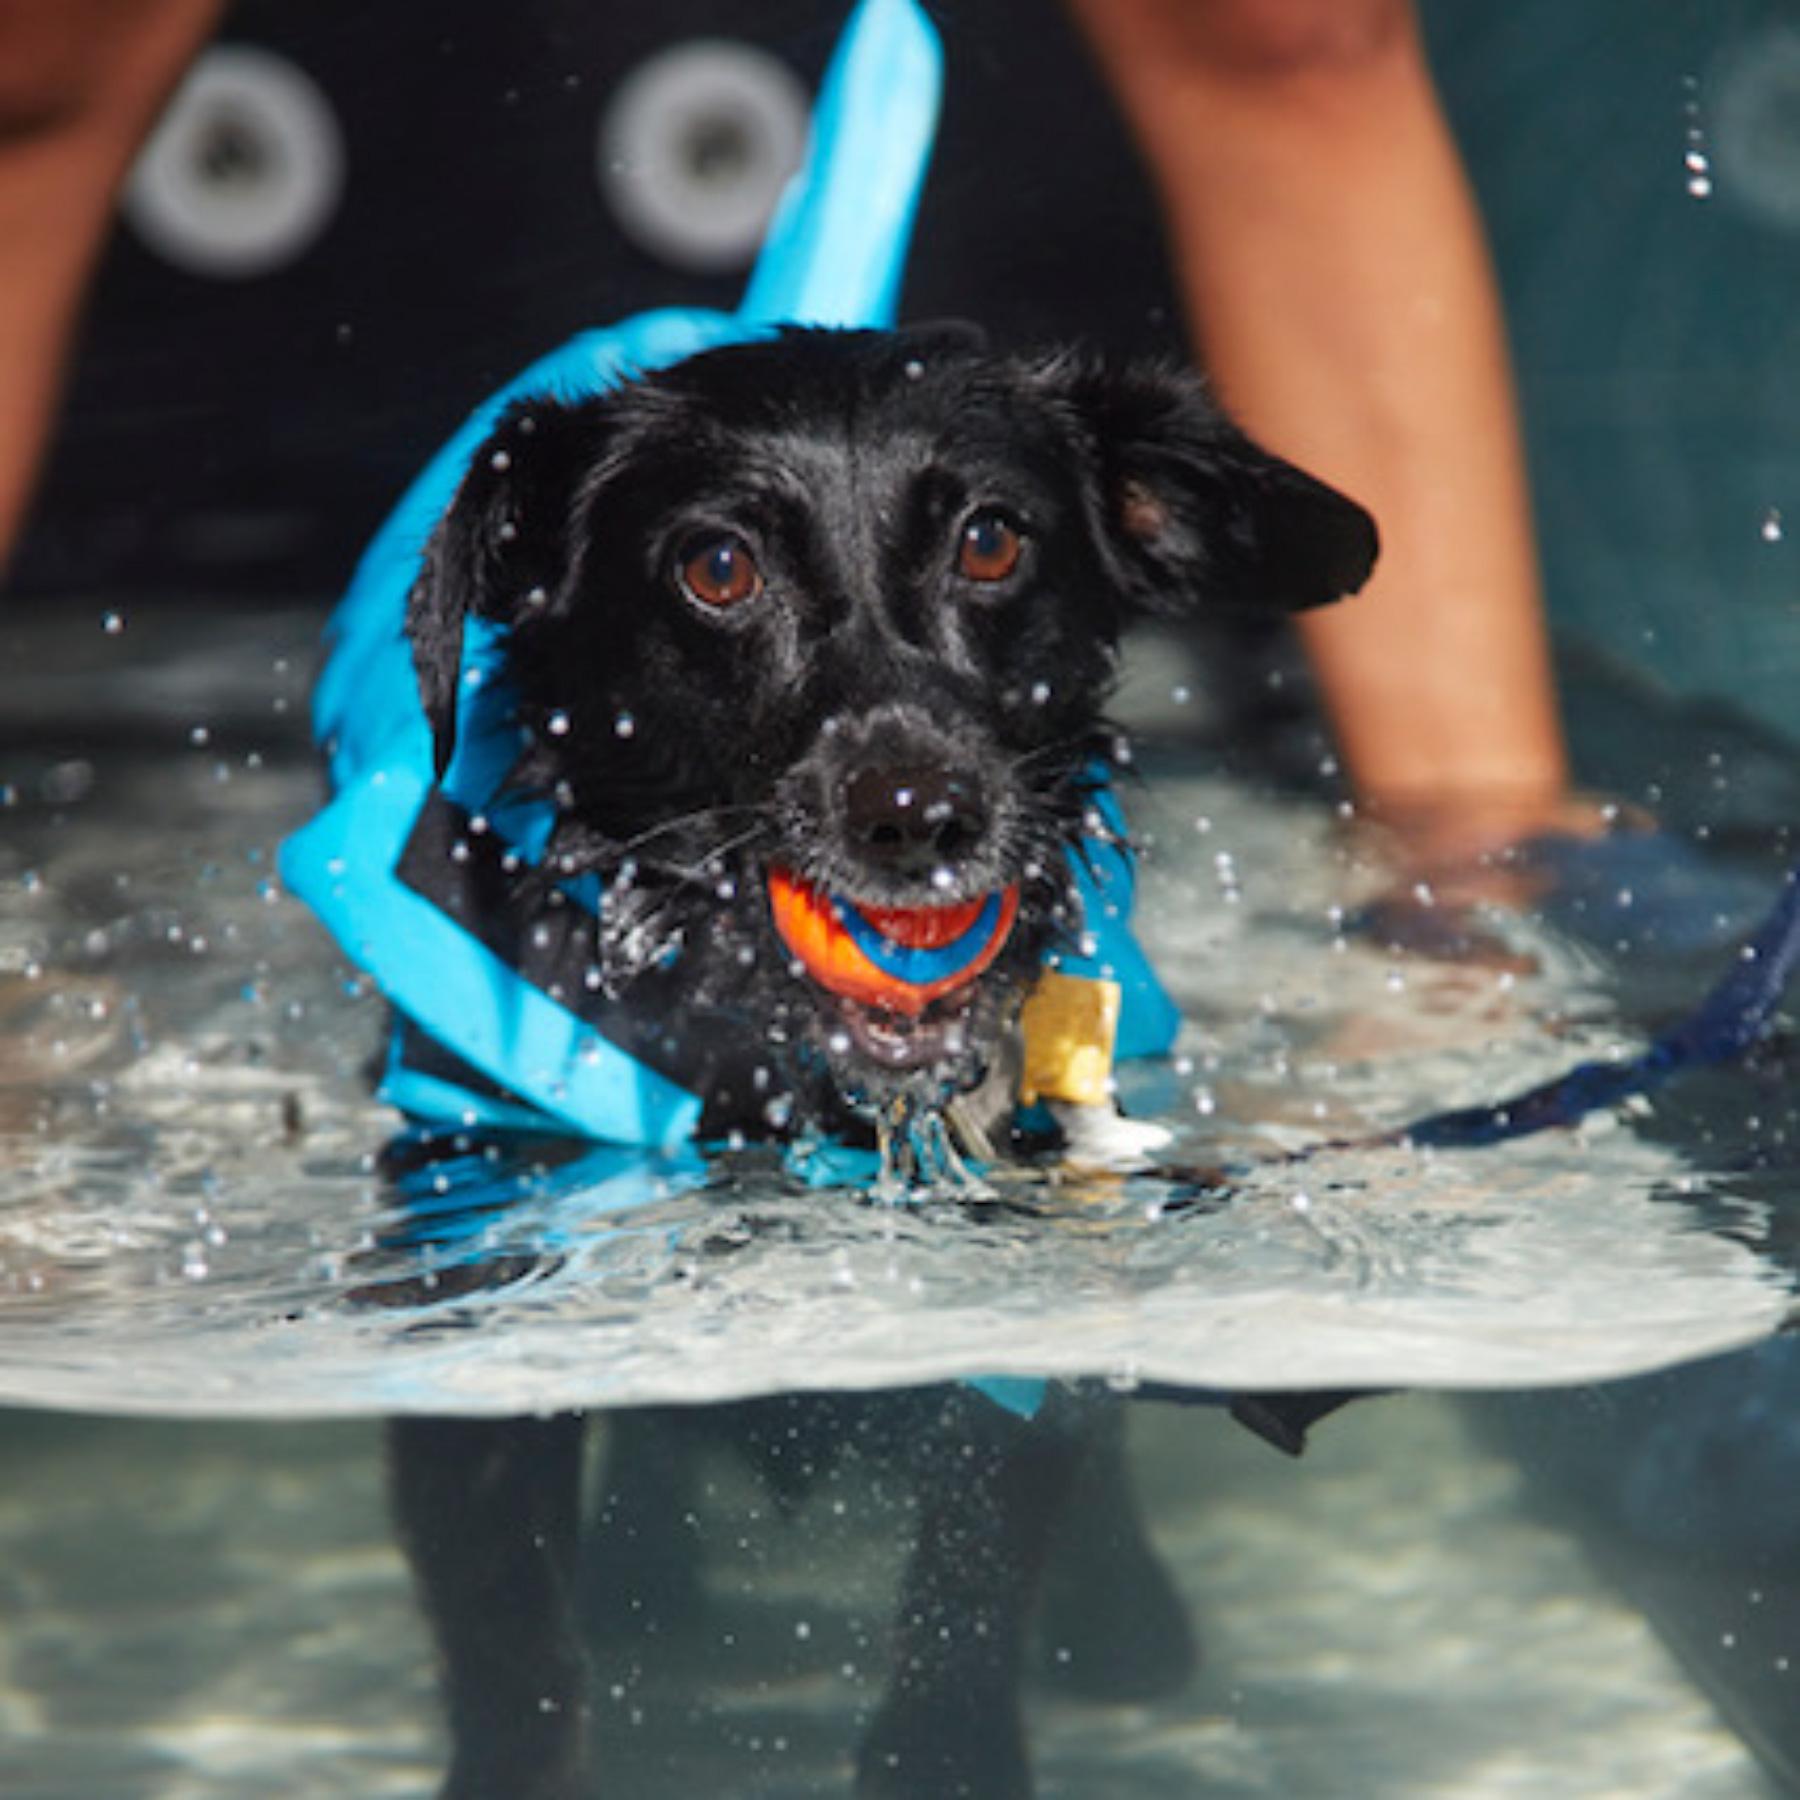 This is our little Loretta, a 3-year-old Mini Dachshund/Jack Russell mix as she plays in the water.